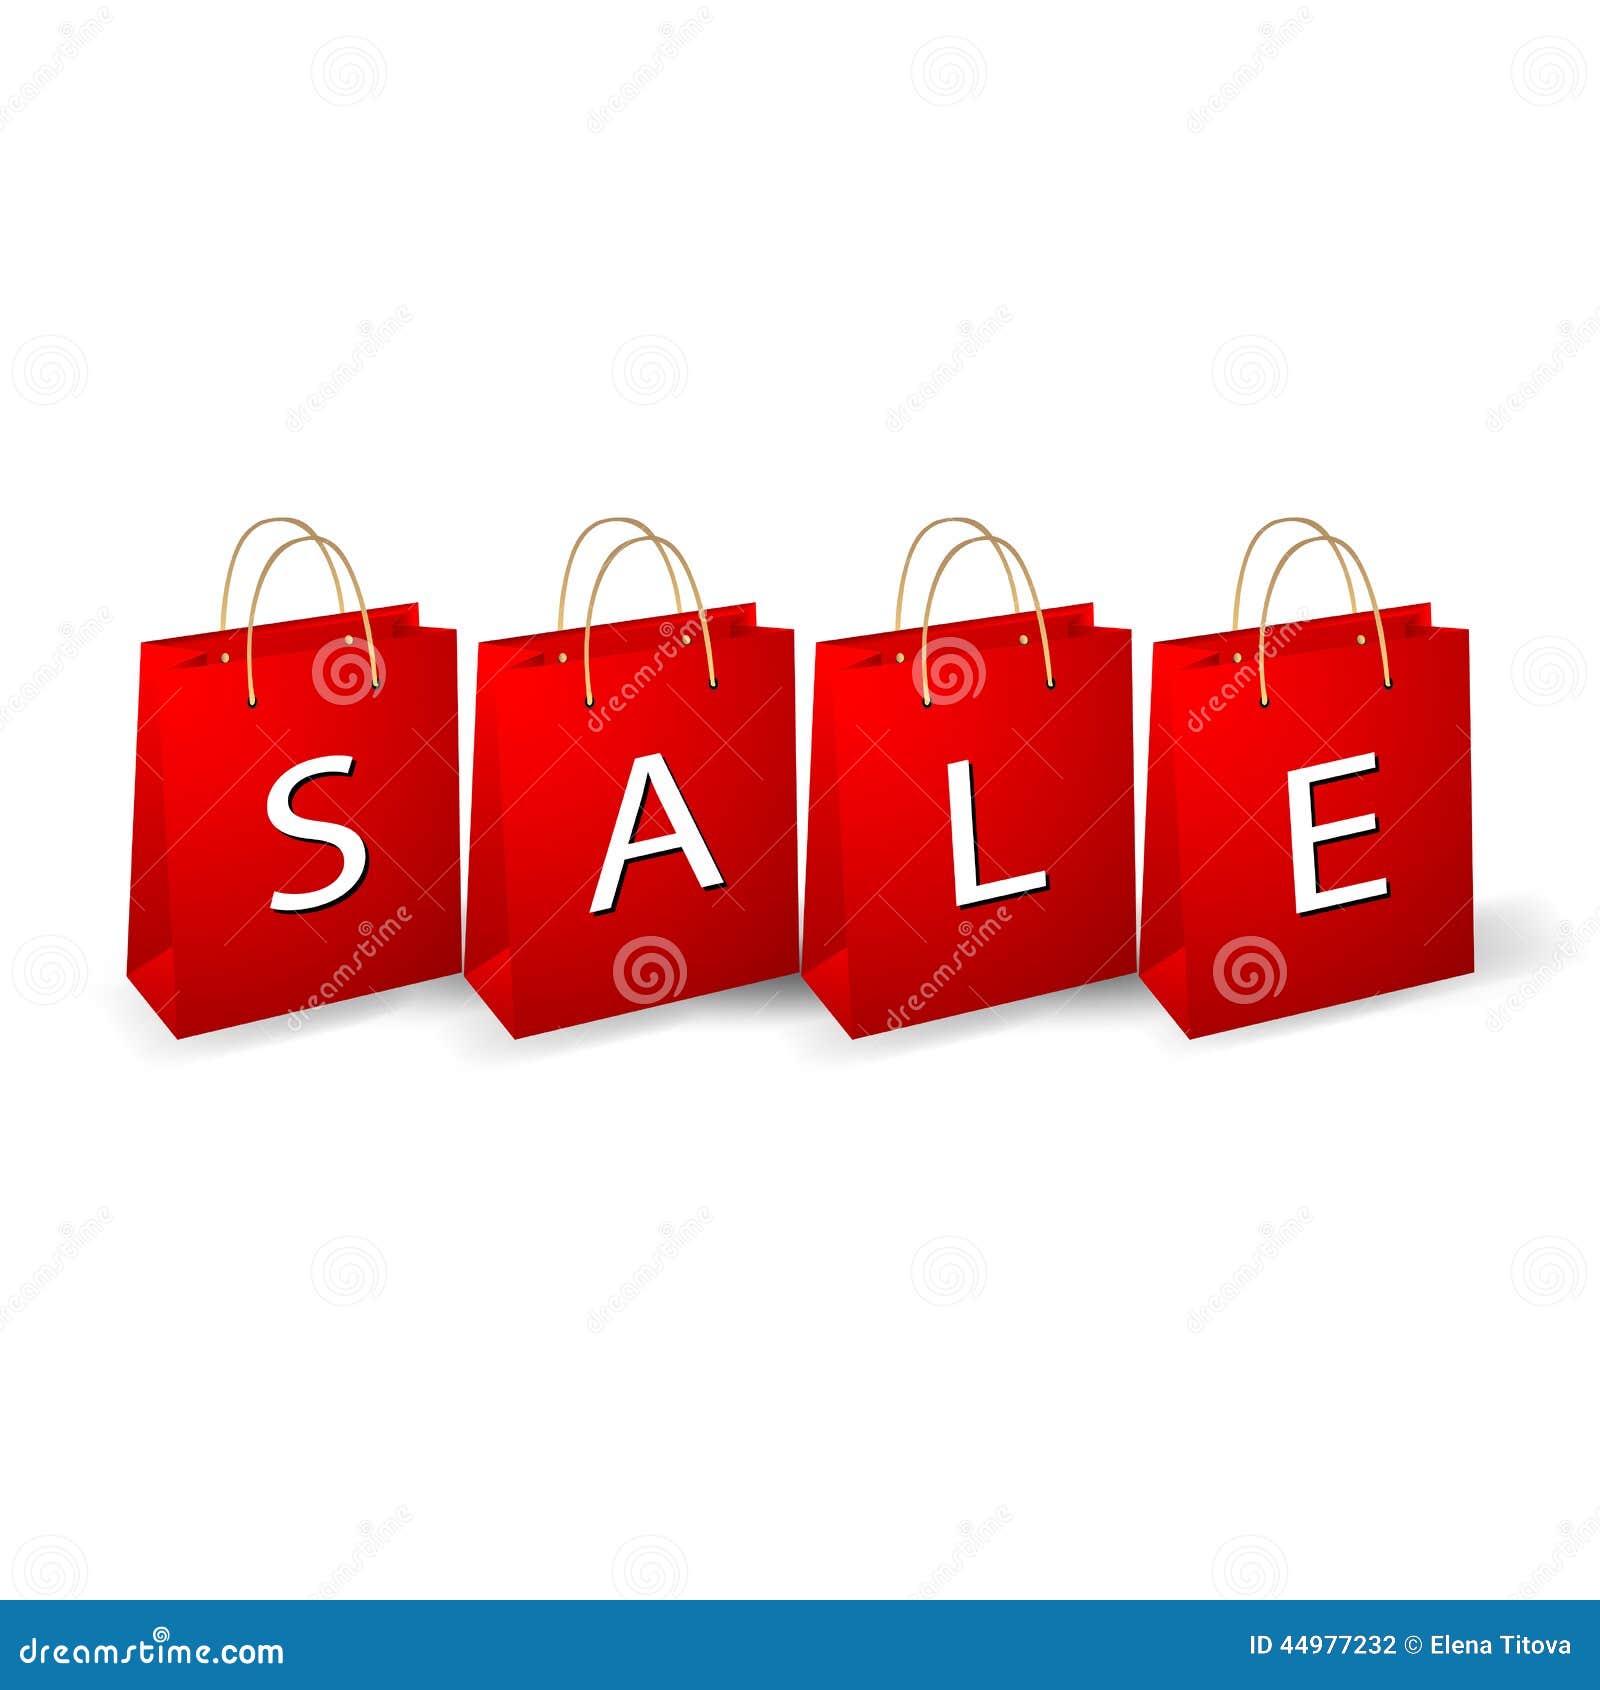 Sale bags stock vector. Illustration of color, consumerism - 44977232